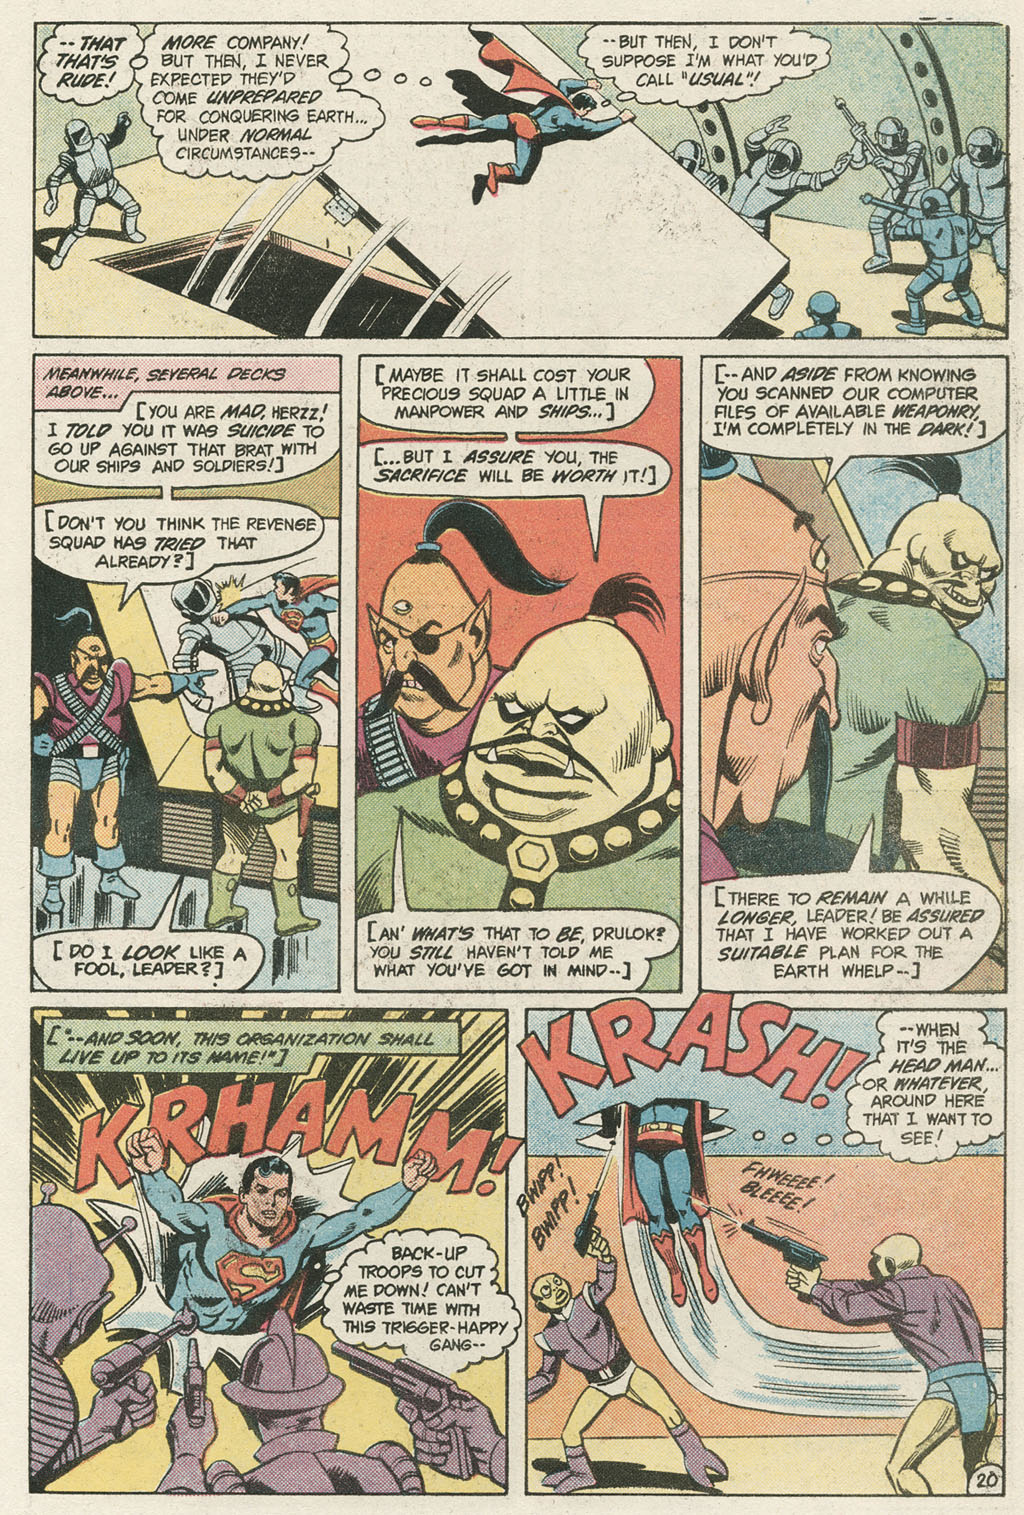 The New Adventures of Superboy 53 Page 25